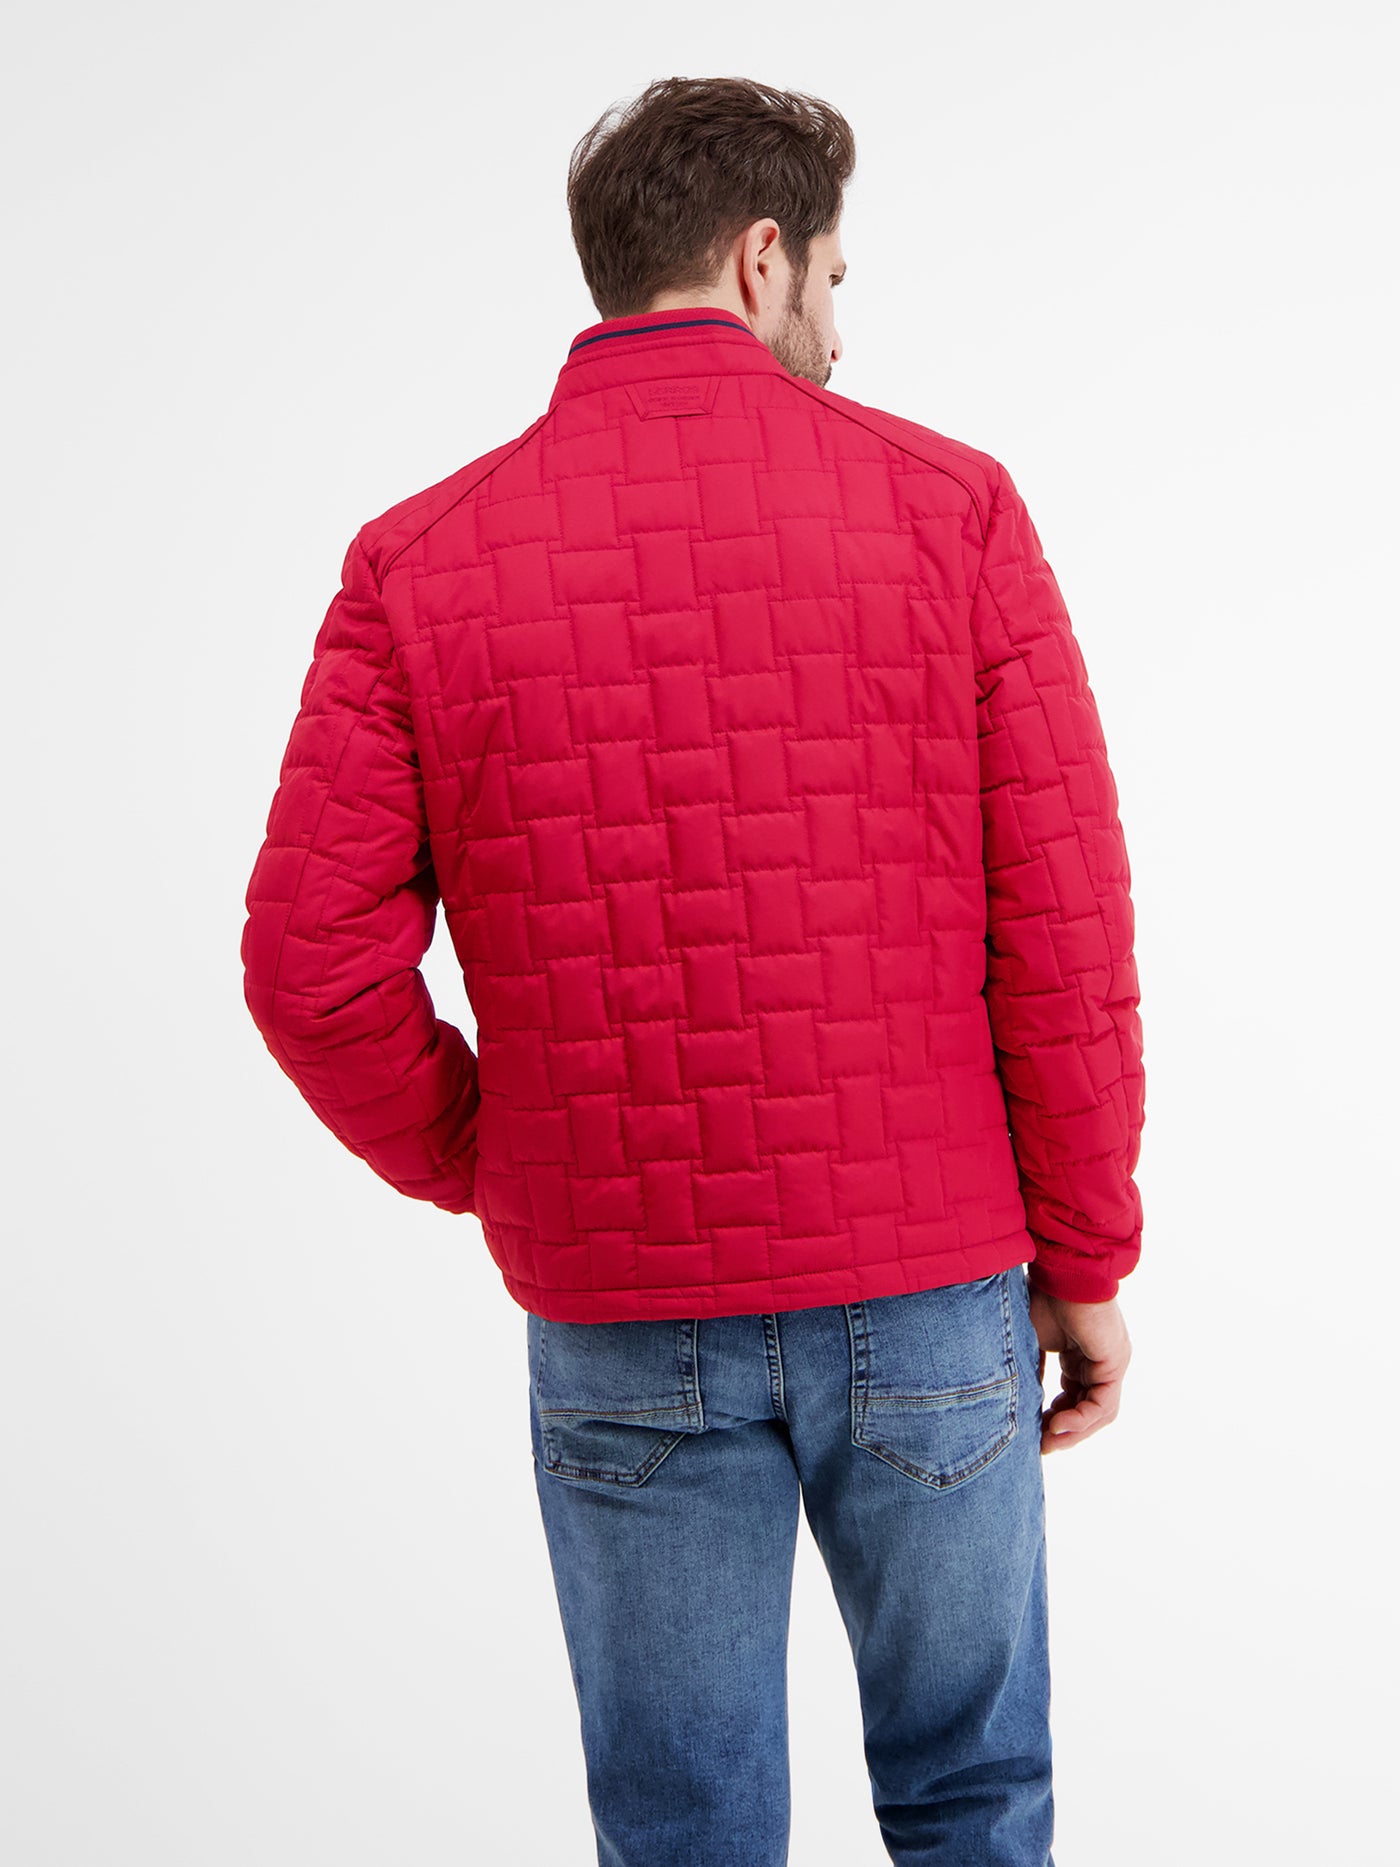 Lightly padded quilted jacket with a sporty look